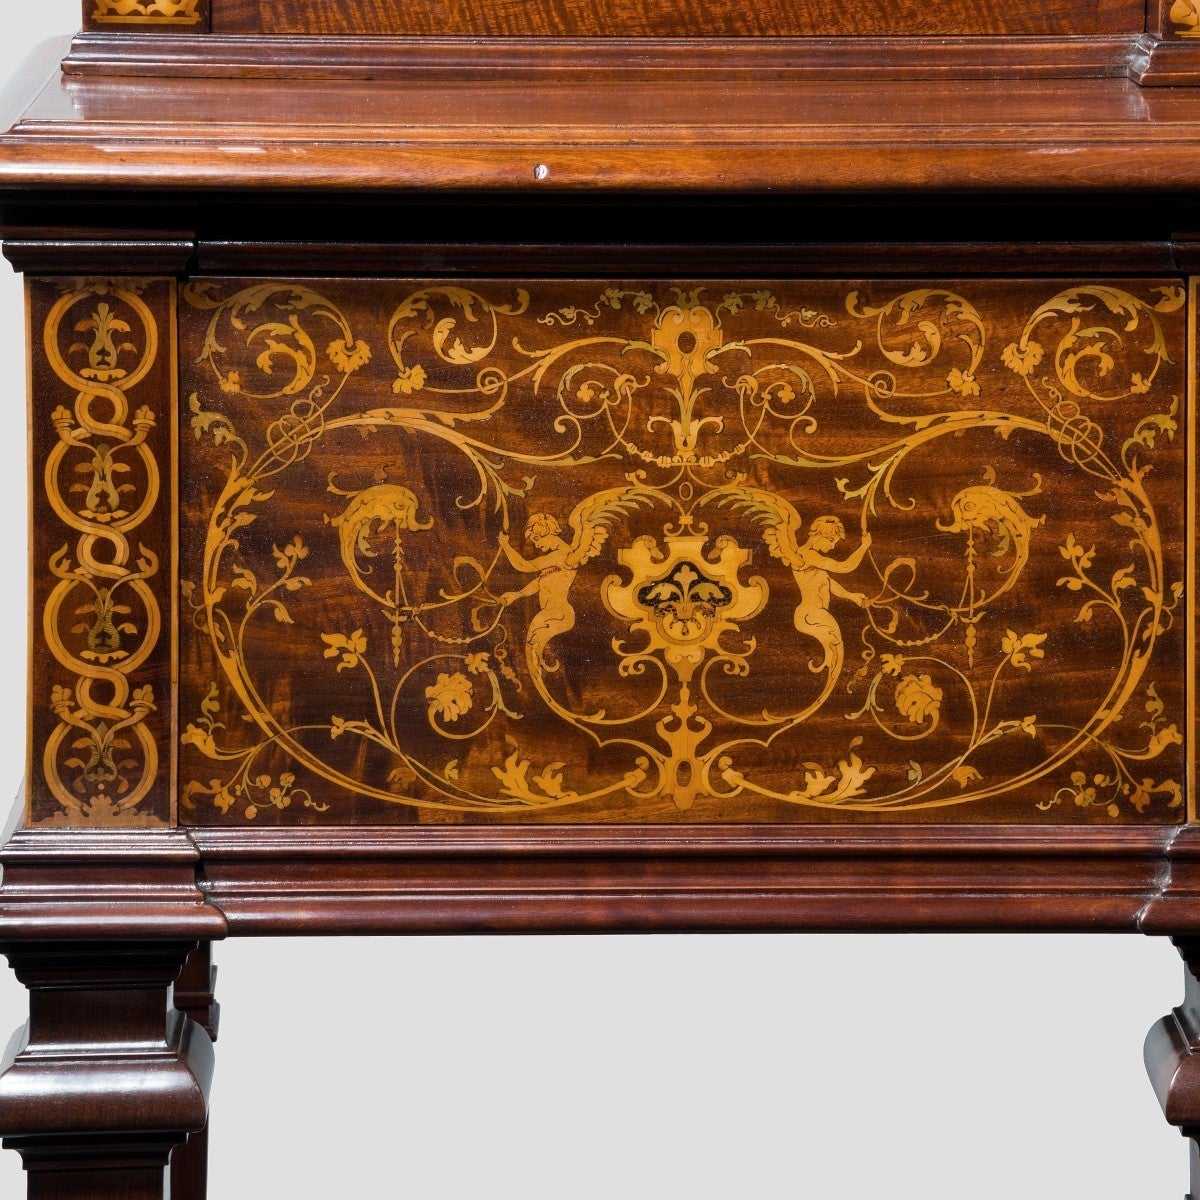 Superb late Victorian mahogany side cabinet with satinwood and box book inlays depicting cherubs and stylized dolphins amongst a floral scene. Three secret drawers to the frieze and three glazed door to the top. Attributed to Collinson and Lock.